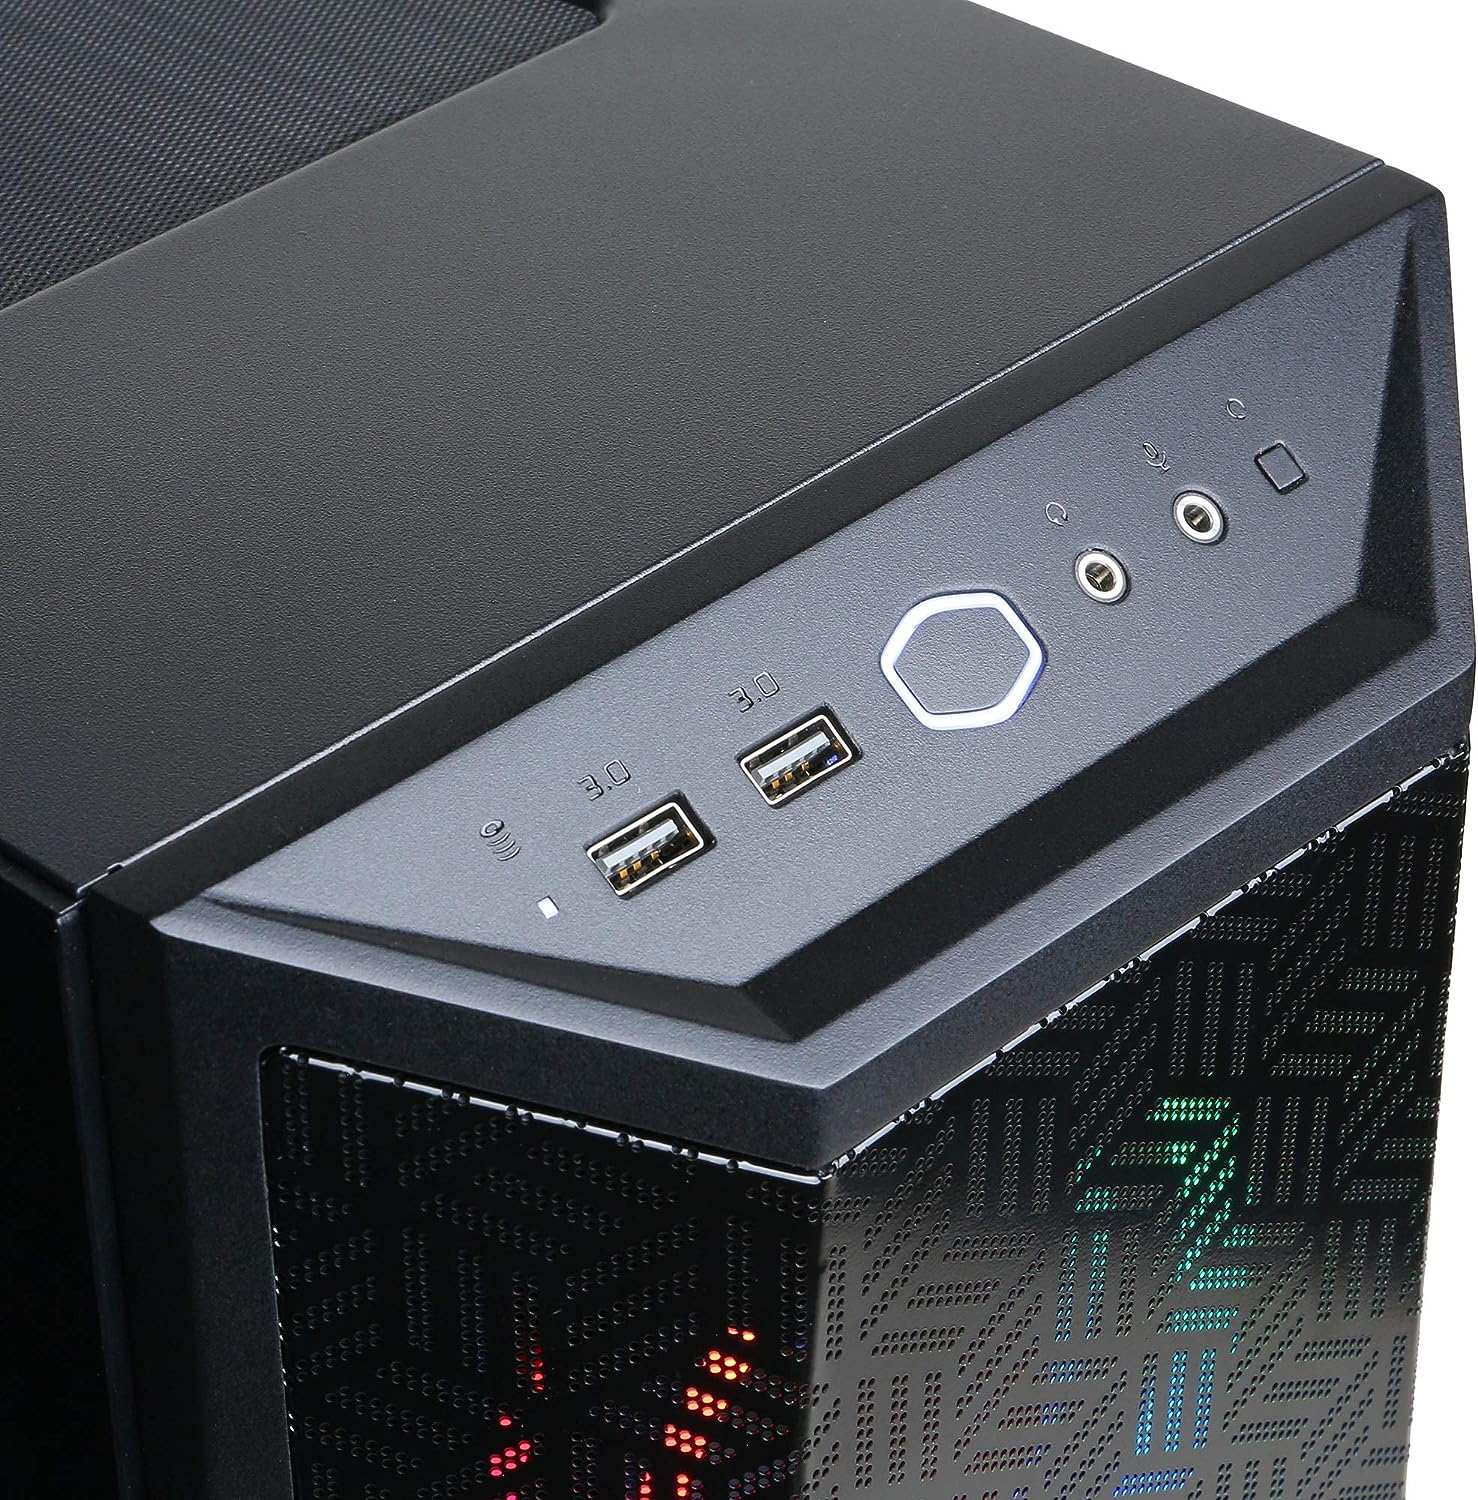 CYBERPOWERPC Gamer Xtreme VR Gaming PC Review